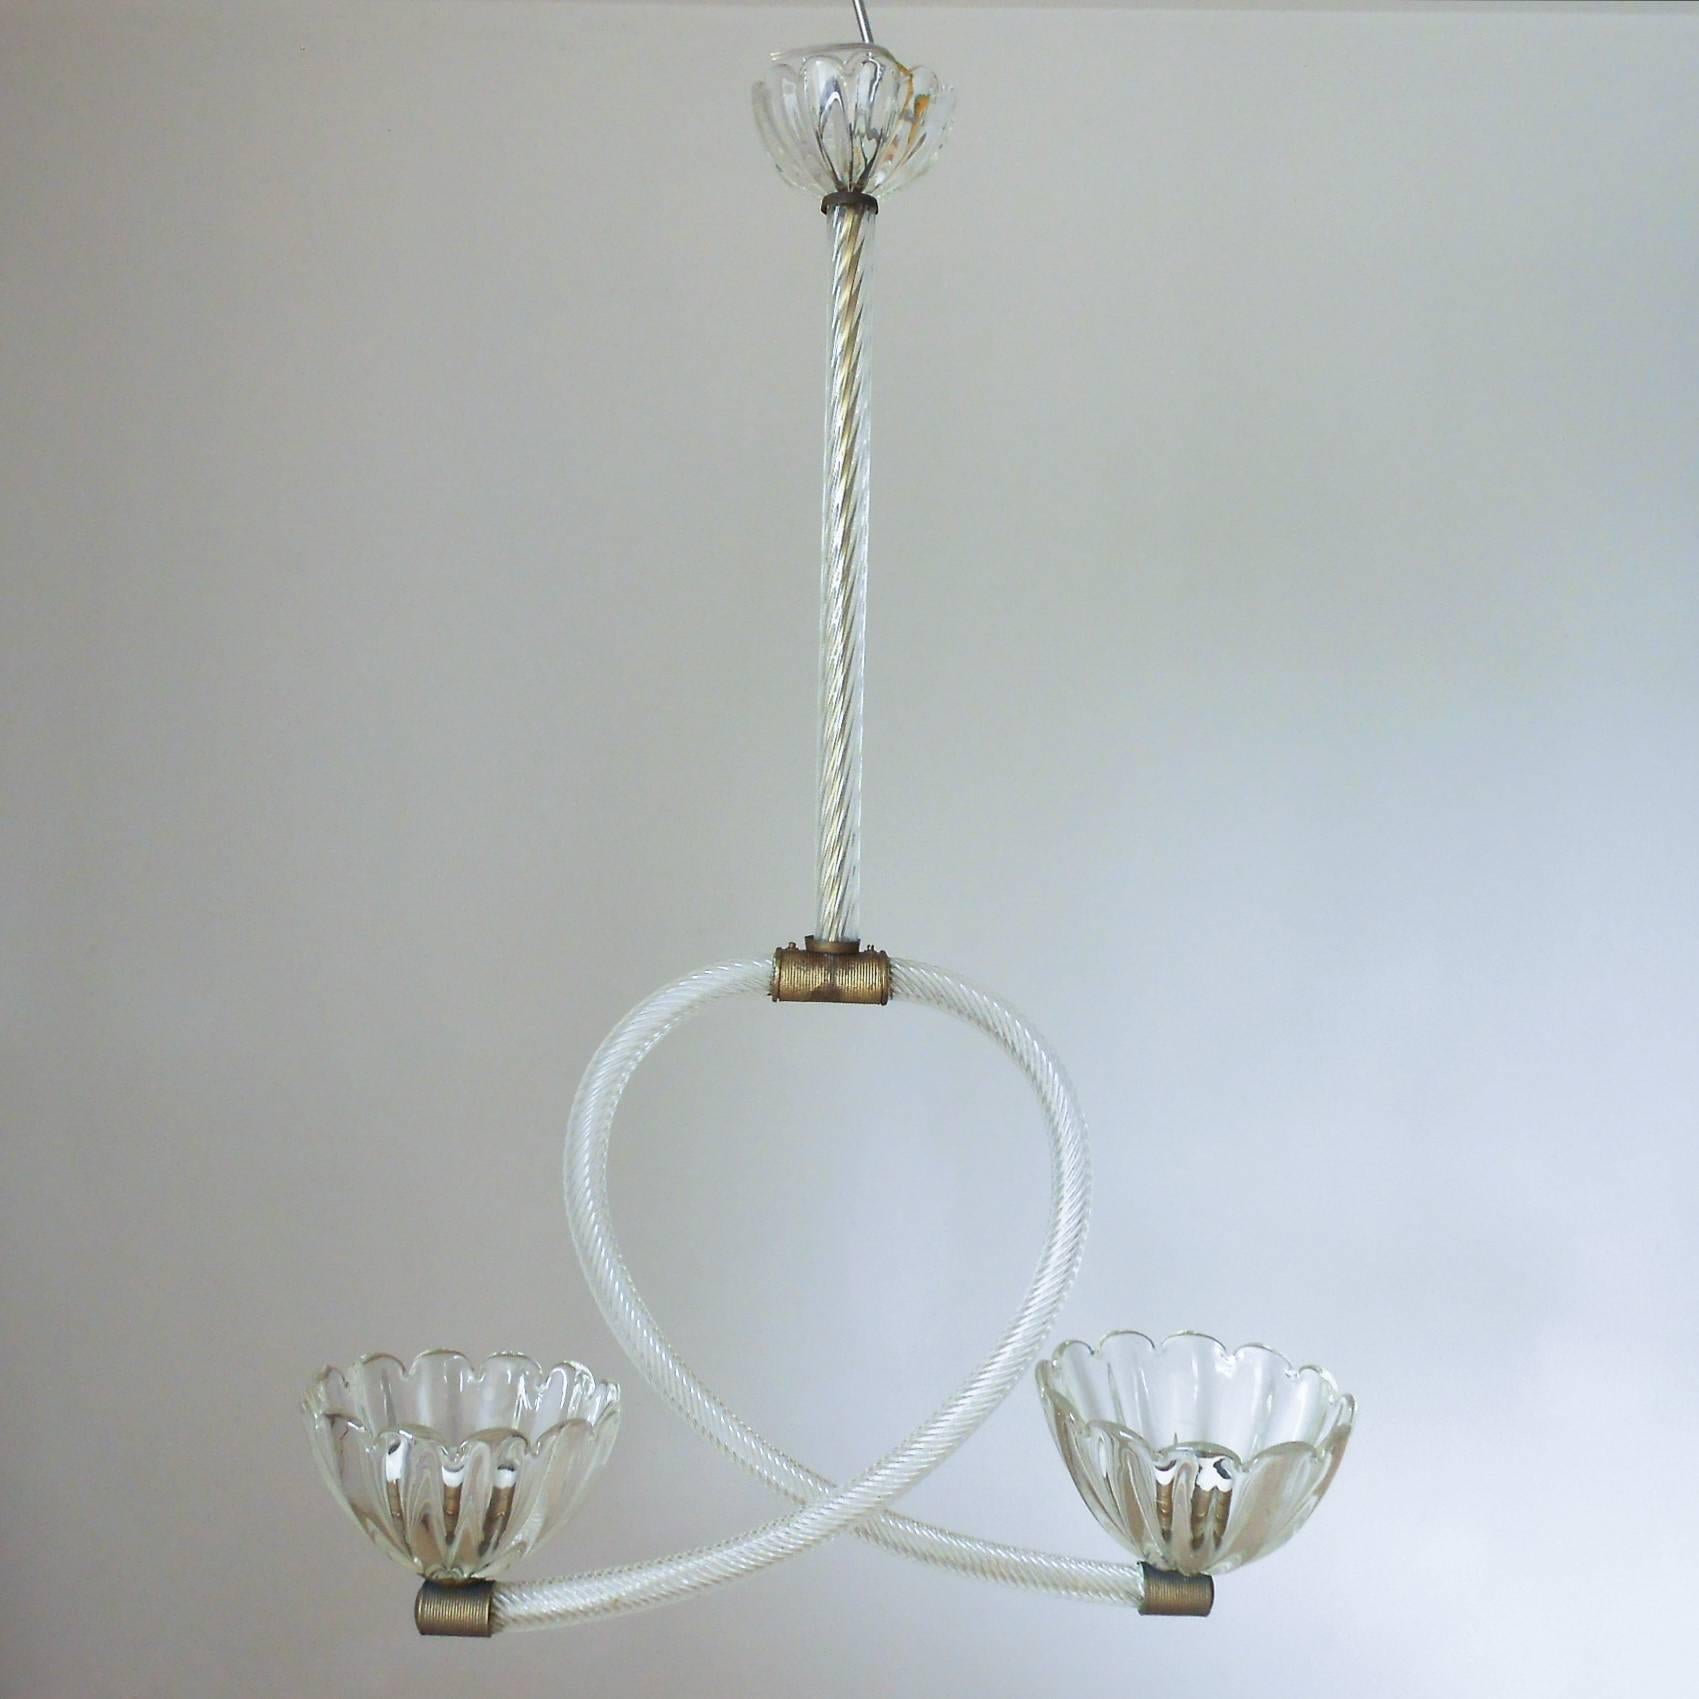 Vintage Italian pendant with clear ribbed Murano glass arms and two scalloped shaped cups and canopy, mounted on bronze hardware encased in ribbed Murano glass / Designed by Barovier e Toso circa 1950’s / Made in Italy
2 lights / E26 or E27 type /